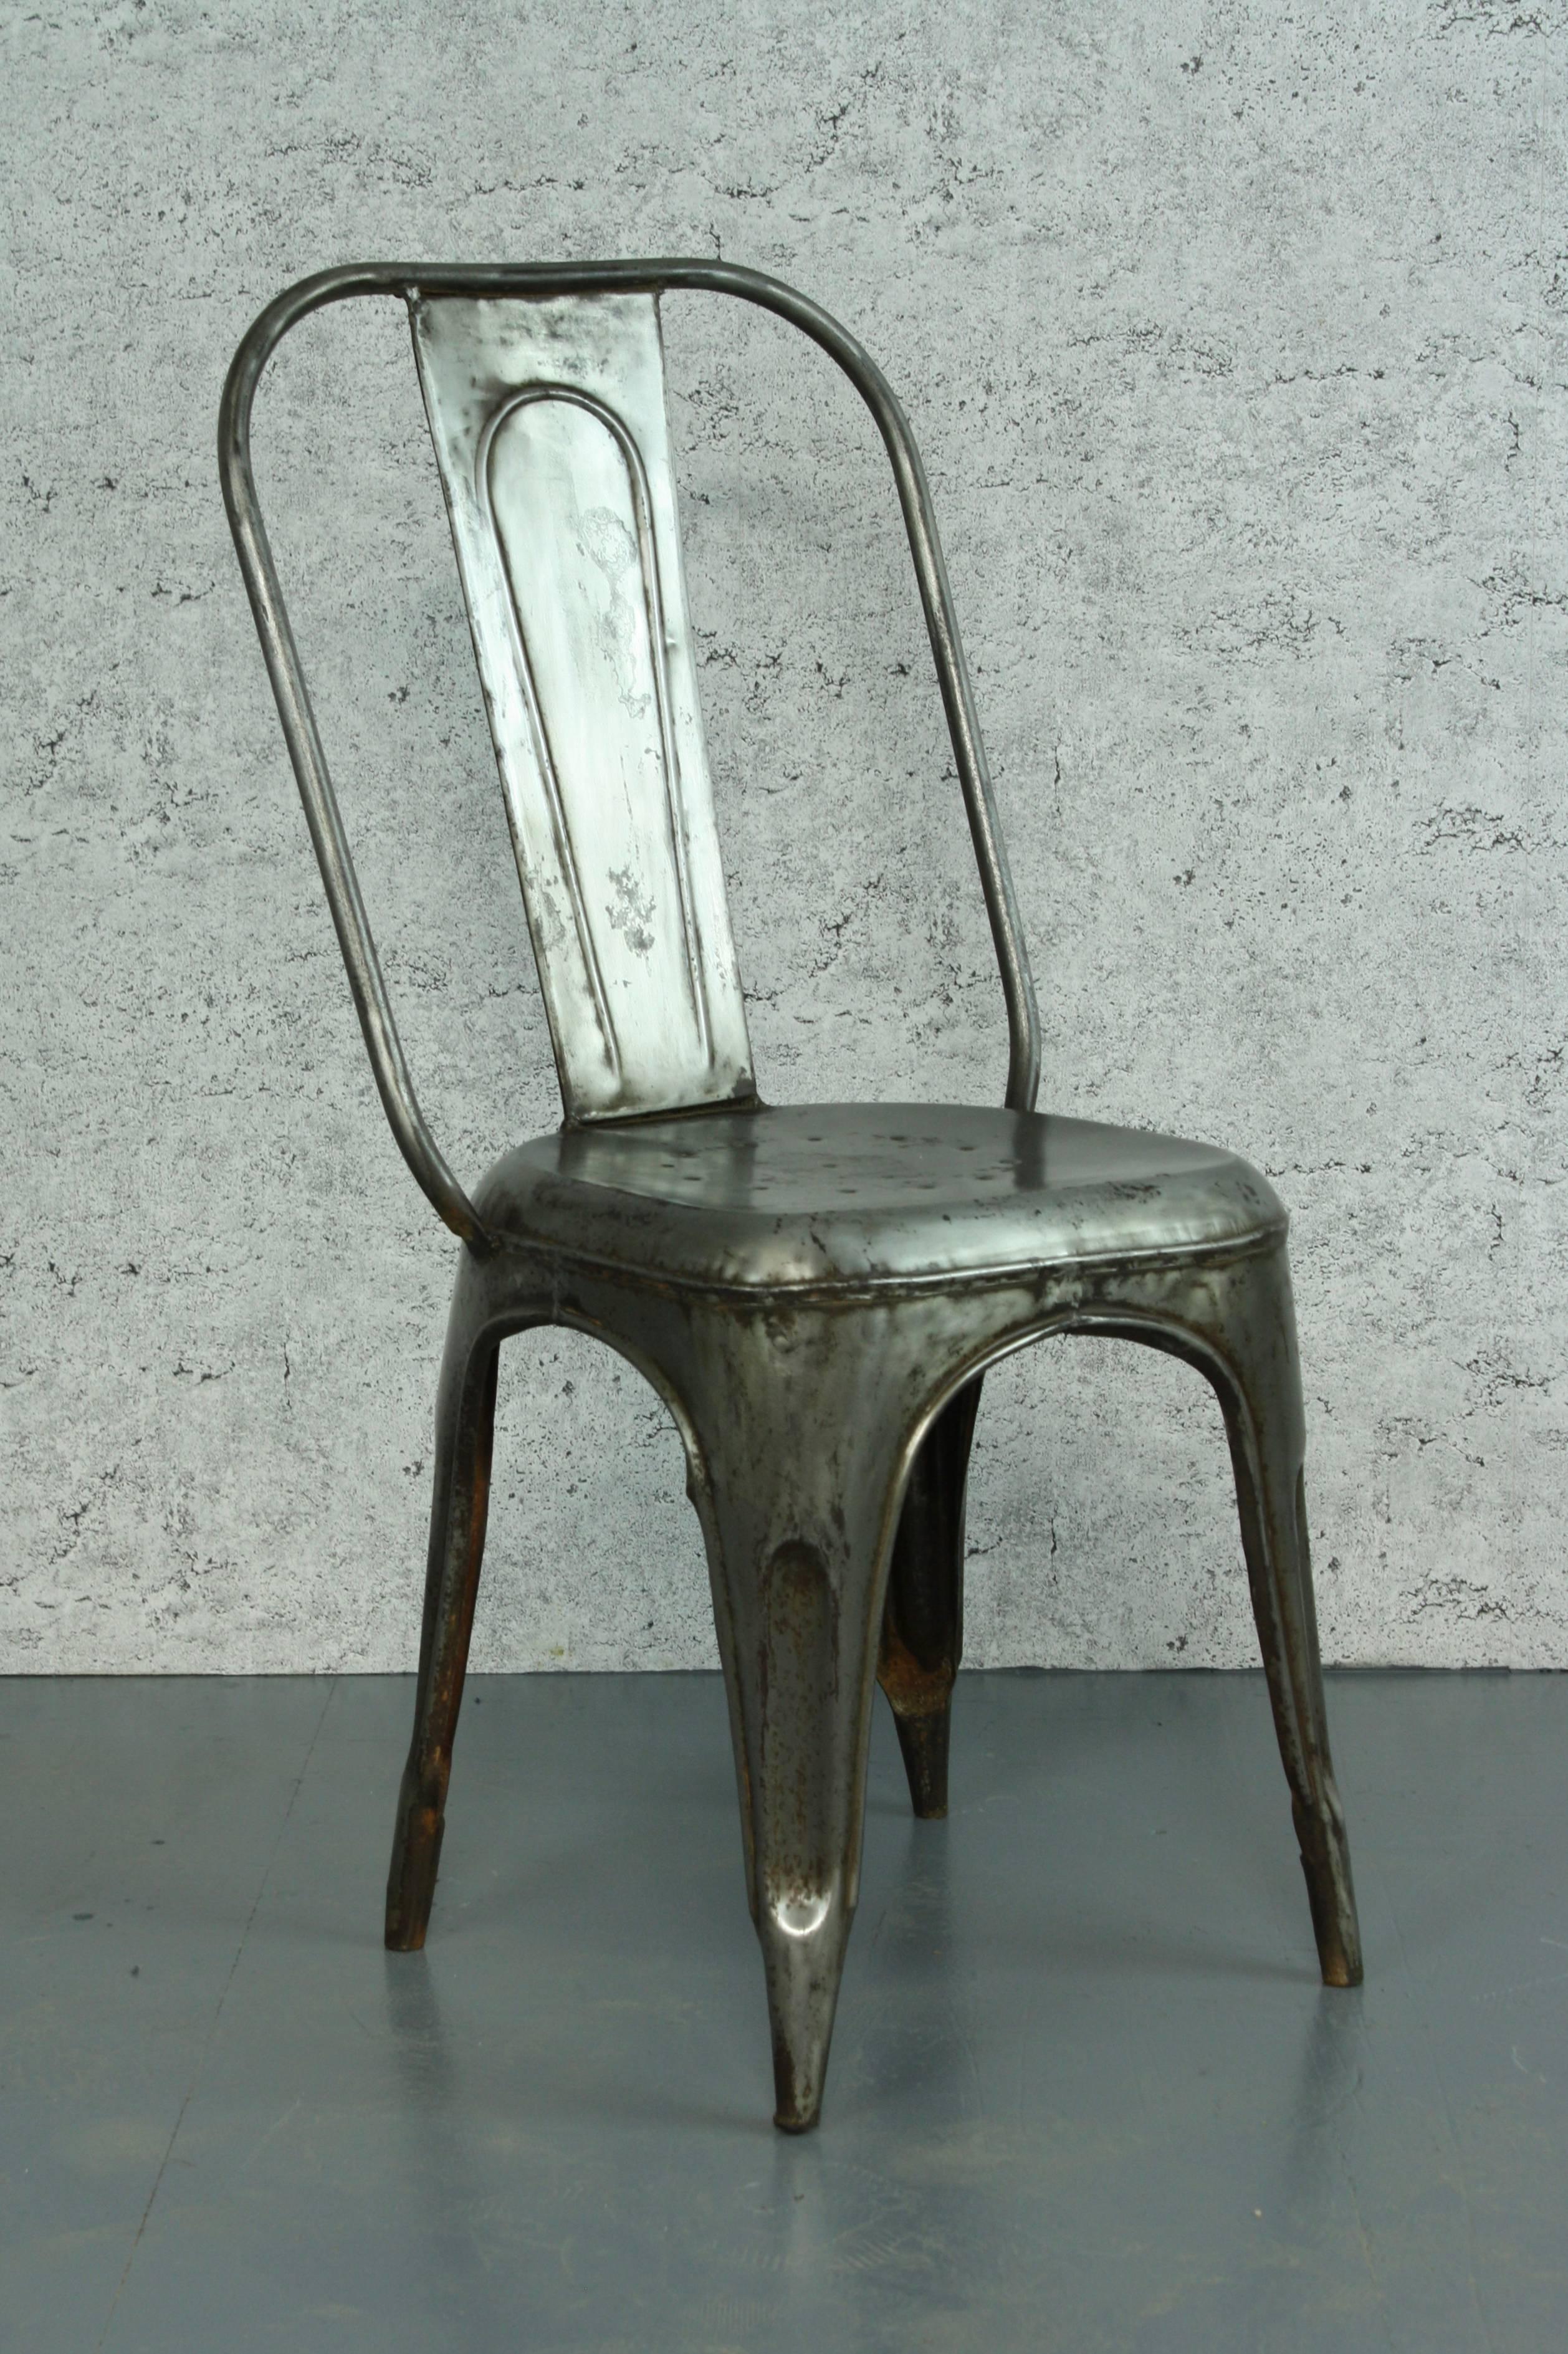 AC chair designed by Xavier Pauchard in 1934, manufactured early 21st century. Galvanised steel, so suitable for outdoor use. 

Its been stripped, polished and waxed.

These chairs are stackable. 

An indestructible design Classic.

We have